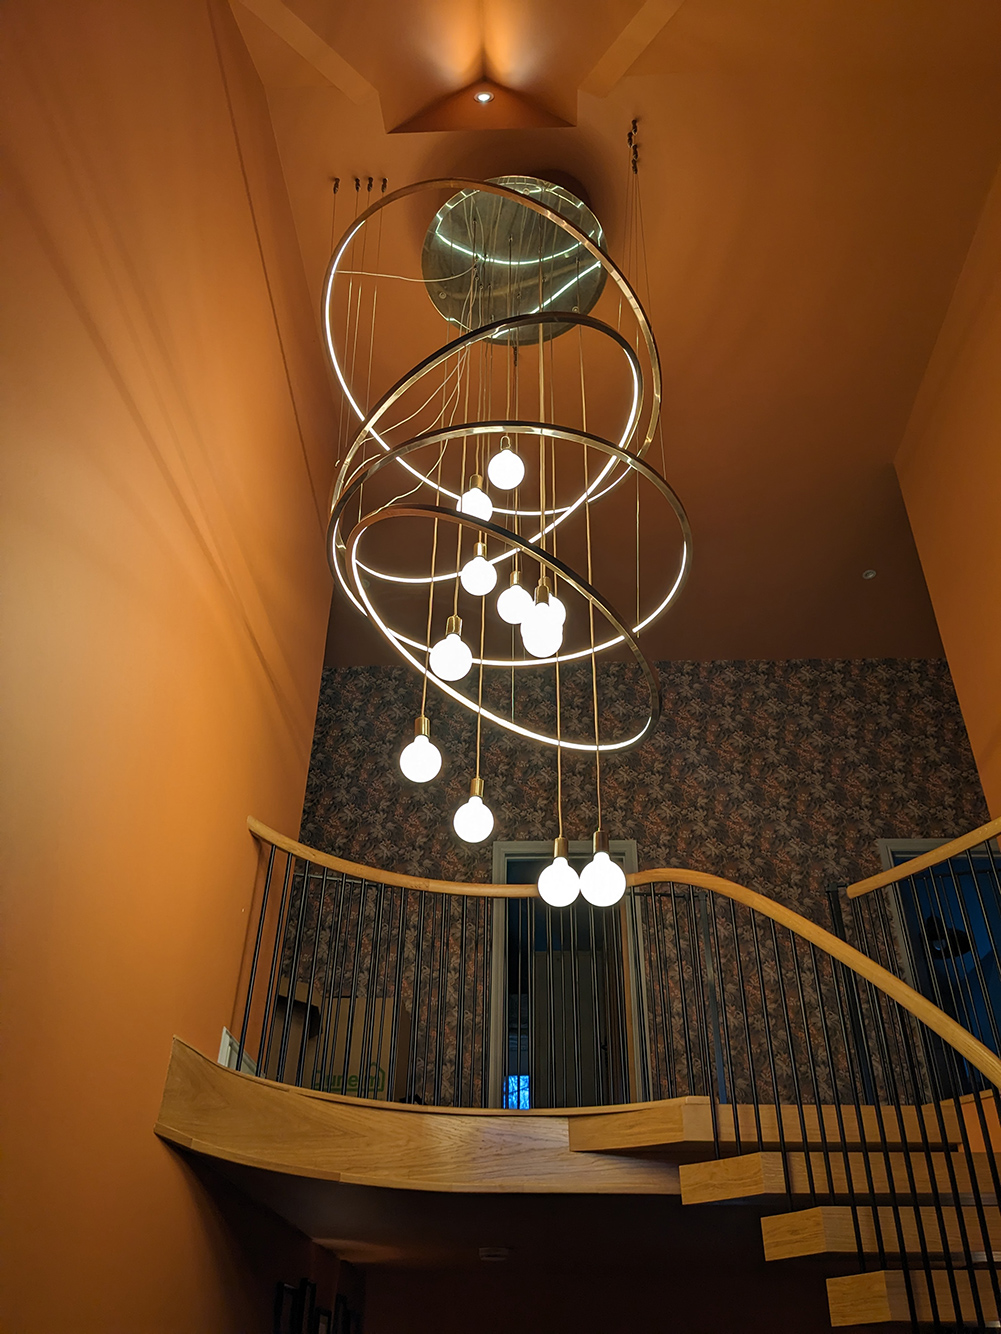 A photo showing the finished chandelier installed and with the lights on.